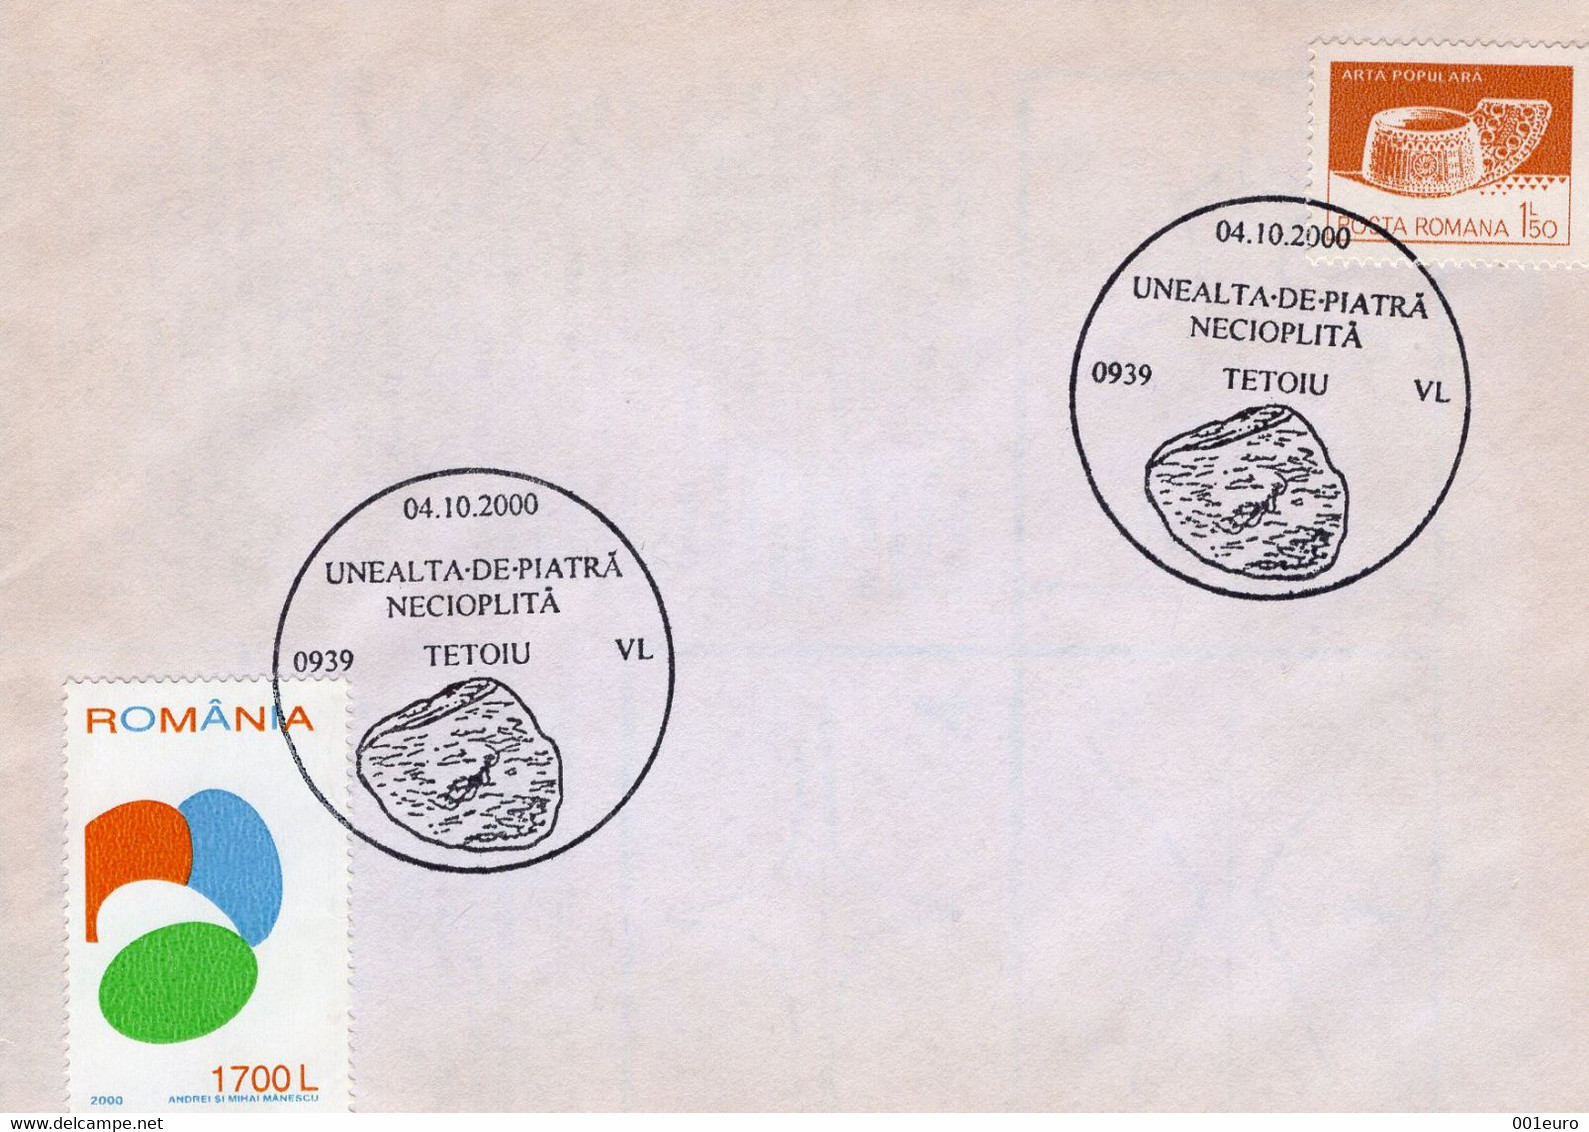 ROMANIA 2000: STONE AGE TOOL Illustrated Postmark - Registered Shipping! - Postmark Collection